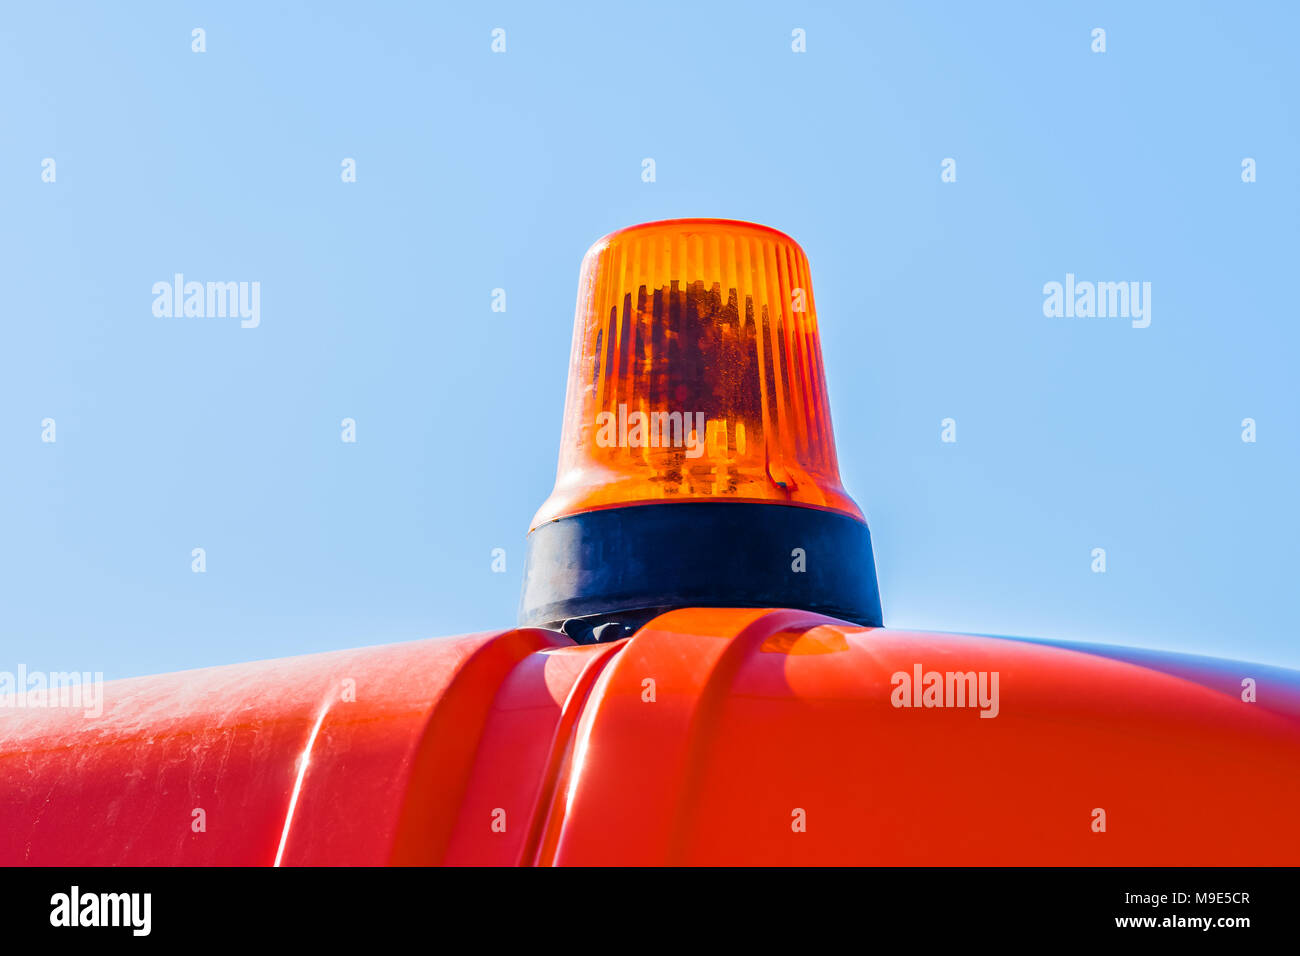 Flasher lamp or a rotating warning beakon of an orange color against the background of clear blue sky Stock Photo